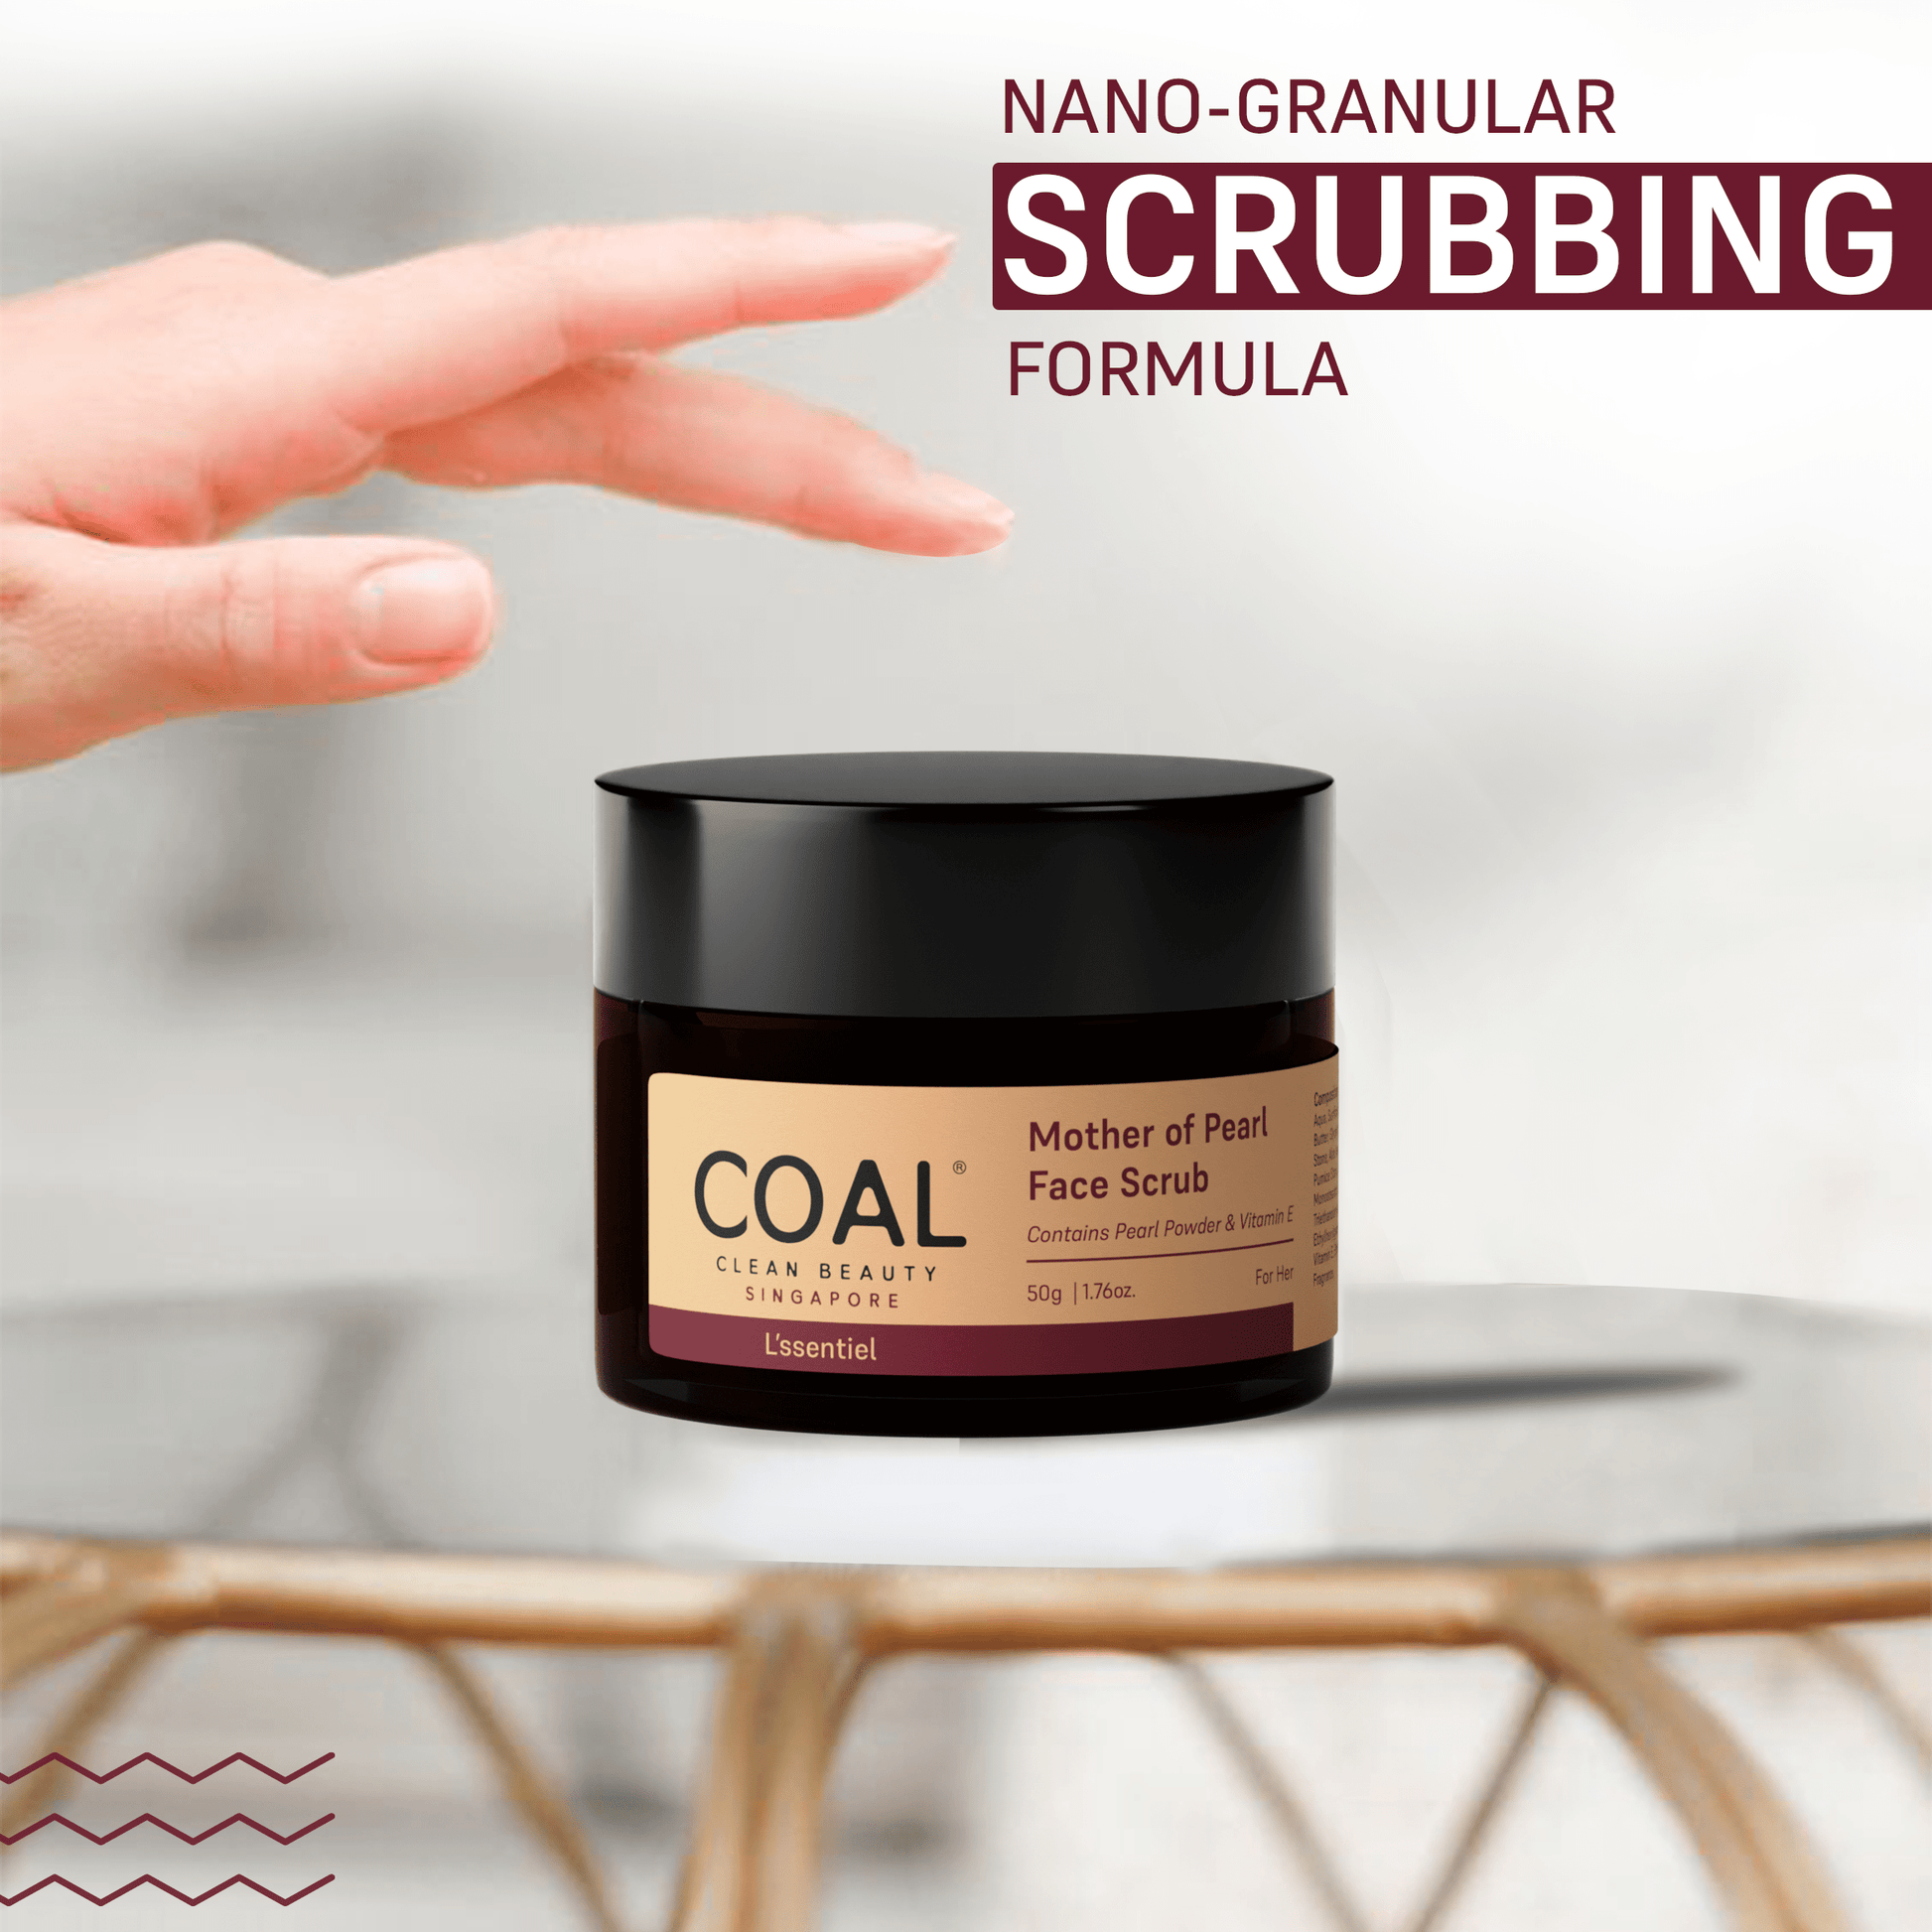 Mother of Pearl Face Scrub - For Her Coal Clean Beauty